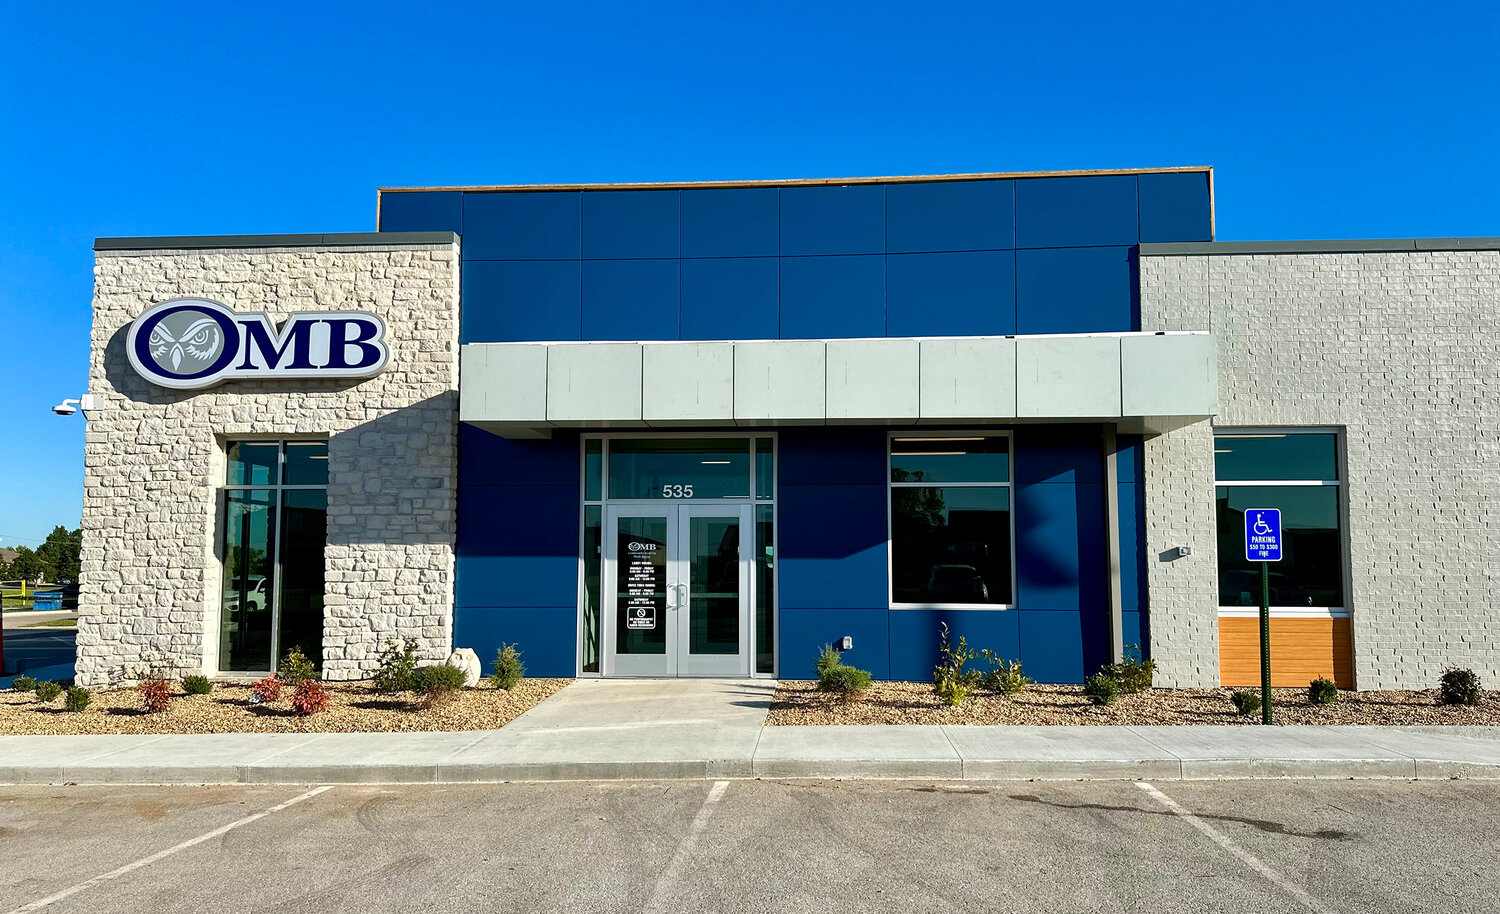 OMB Bank on Oct. 10 traded a 4-year-old modular banking facility in Carthage for a newly constructed full-service branch.